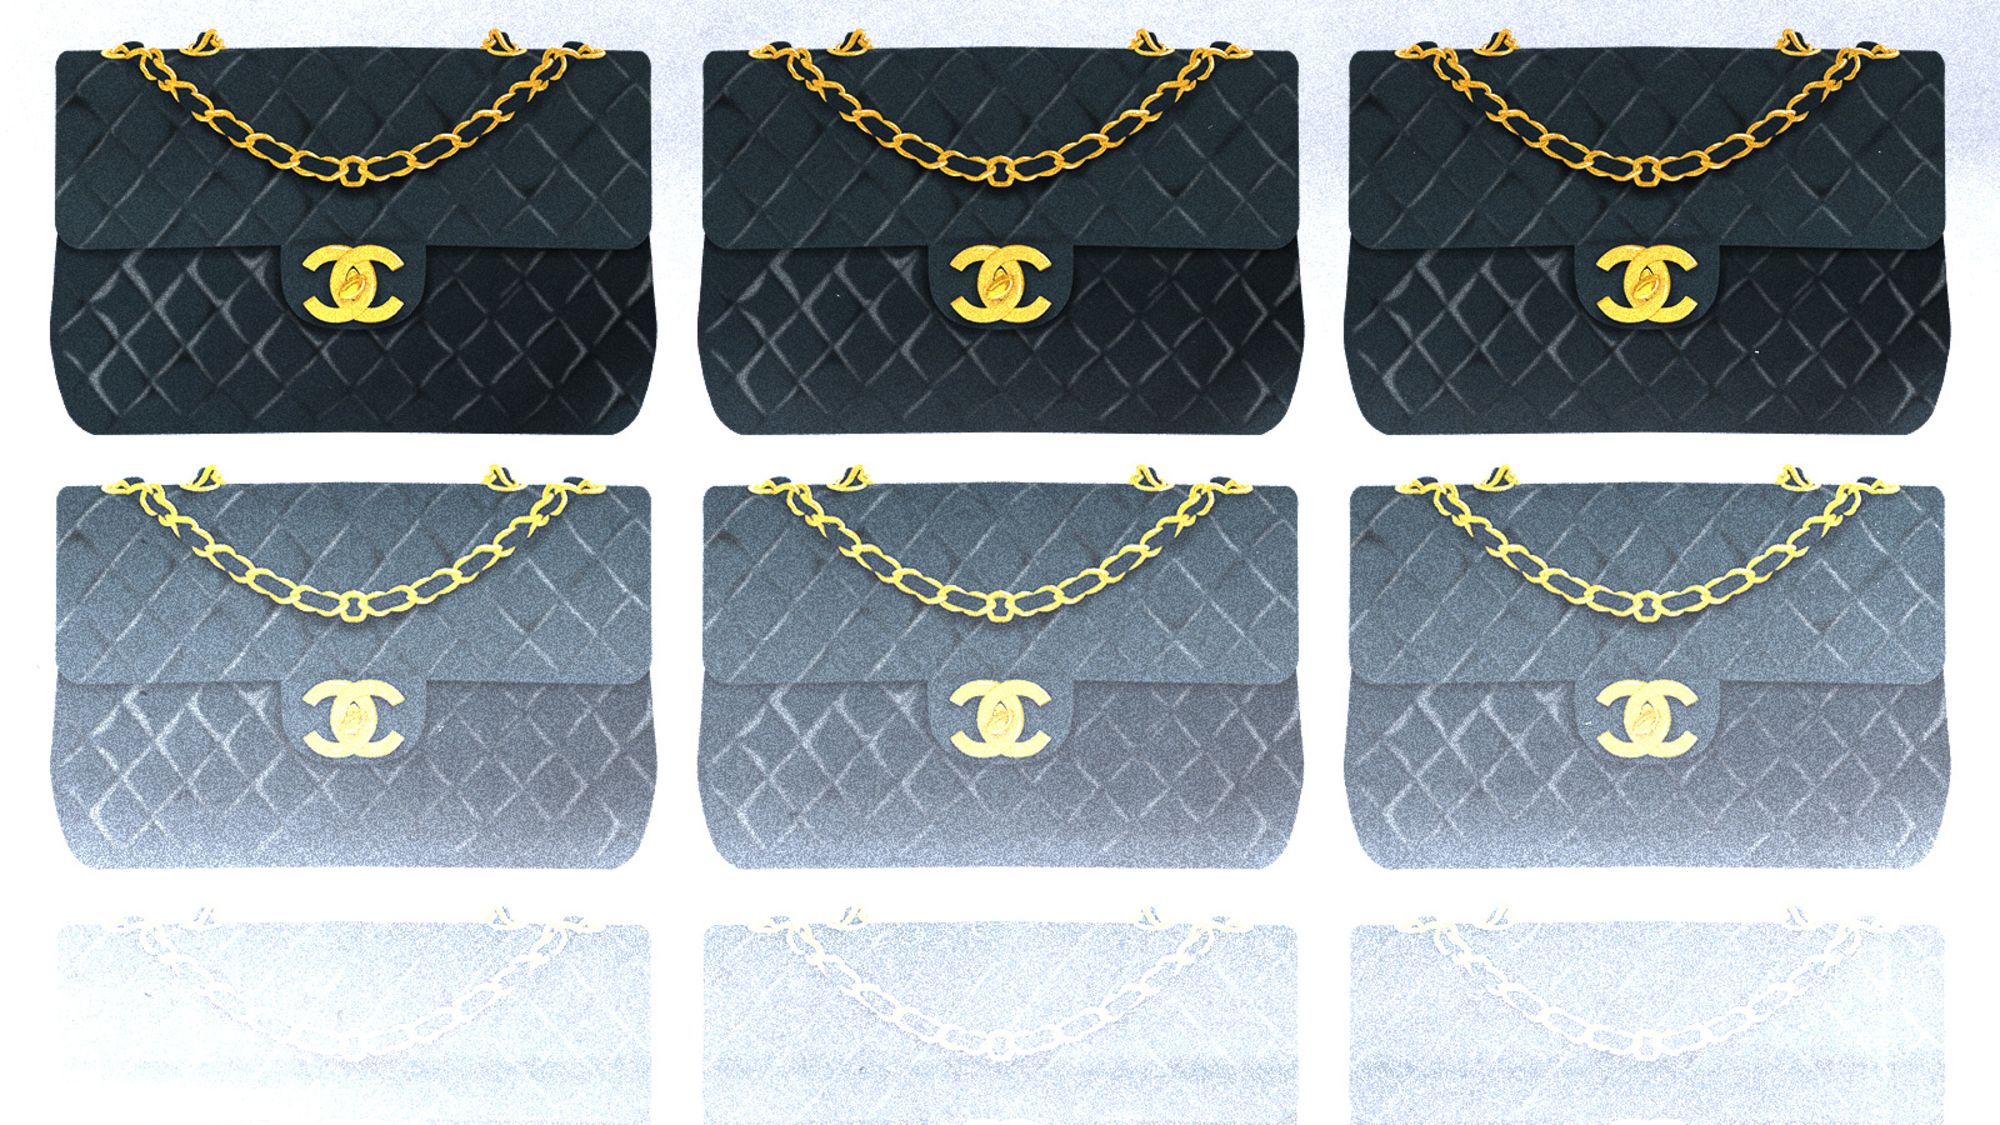 Keeping It Real w/ Luxe Du Jour: Top 3 Risks of Buying Counterfeit Handbags  — The Issue.